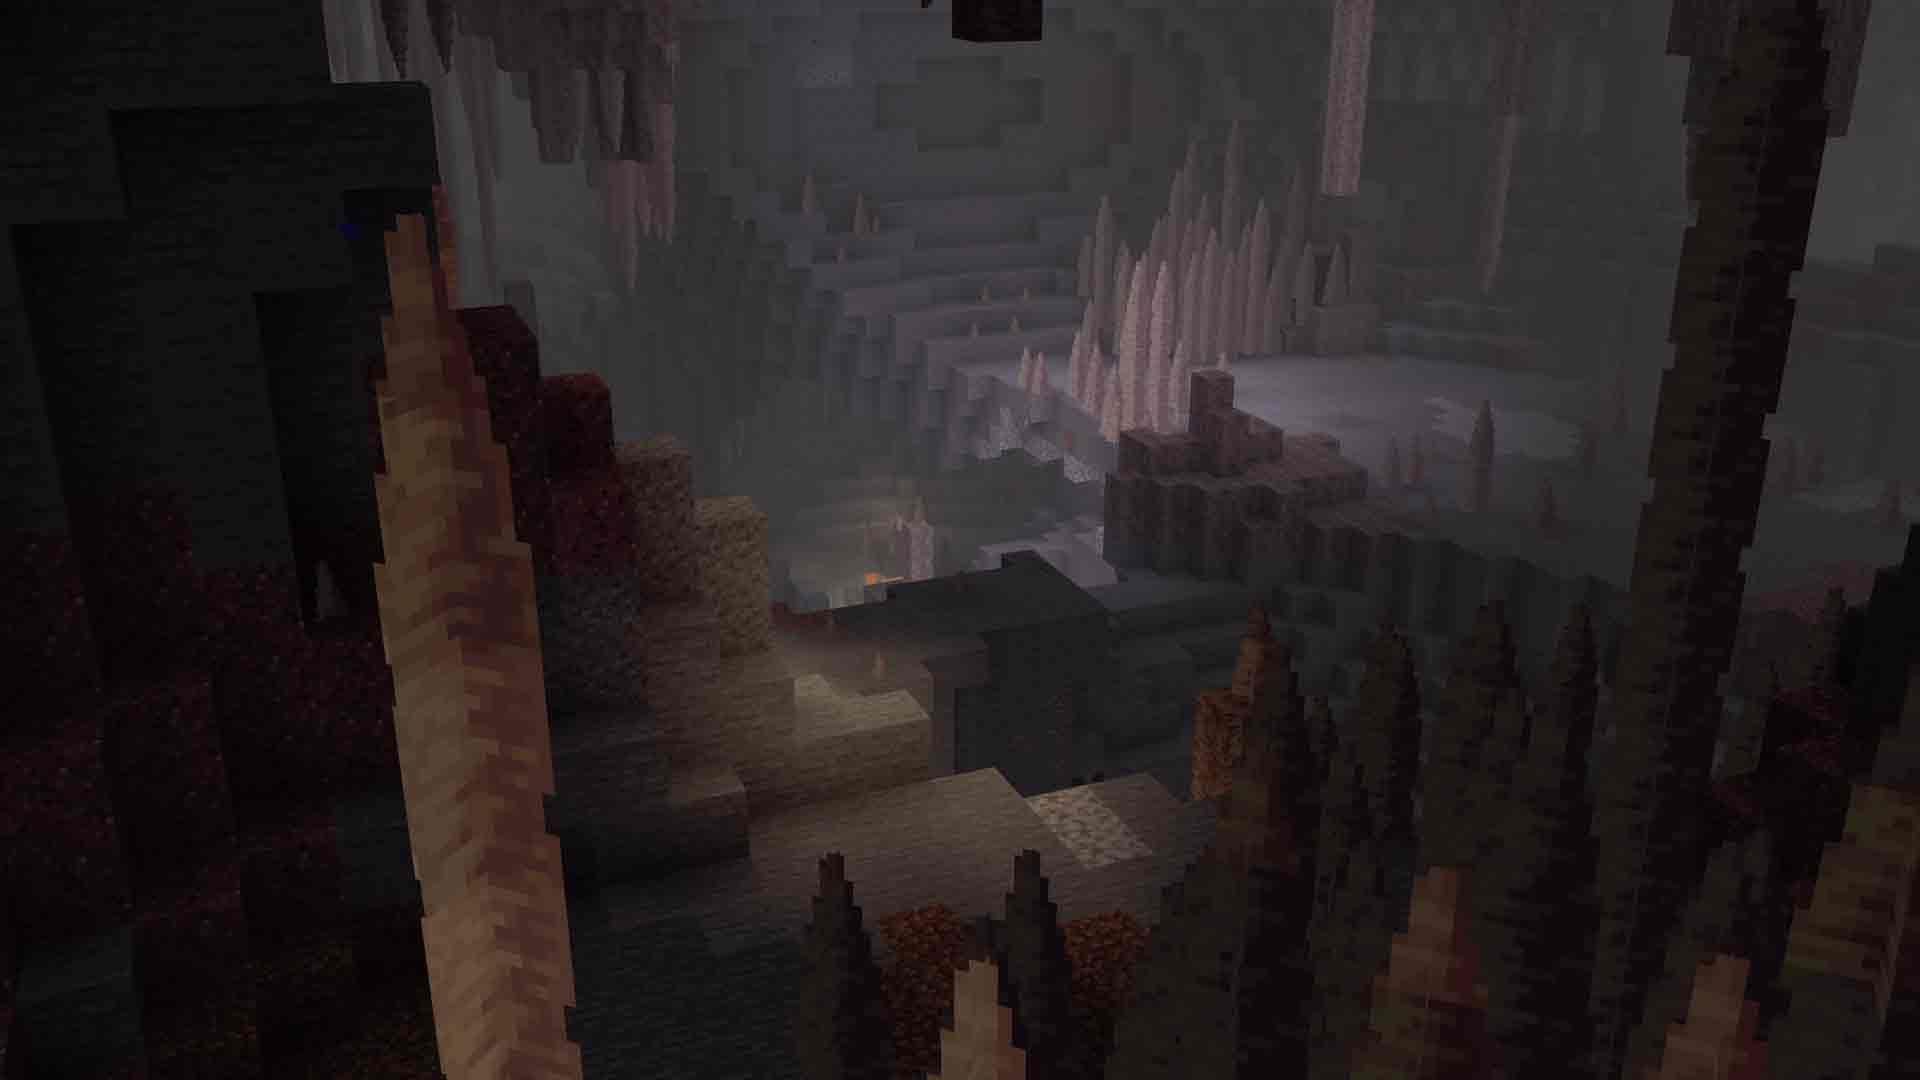 Minecraft Caves & Cliffs Update adds archaeology, axolotls and improved caves